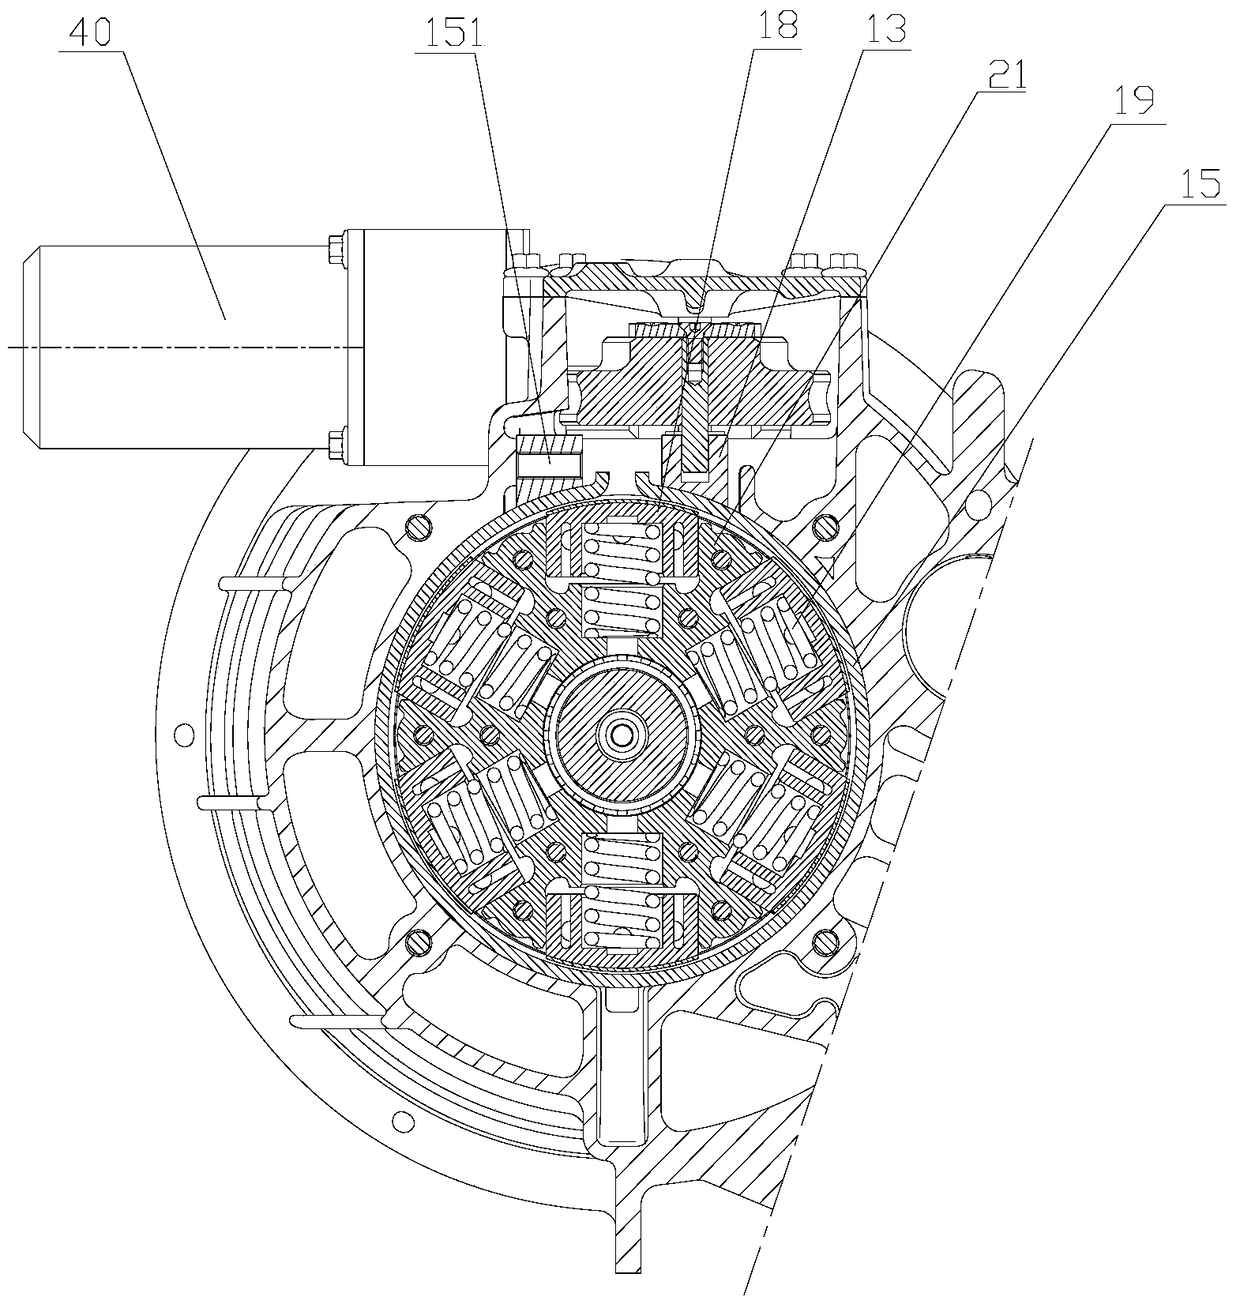 Transmission mechanism of two-speed automatic transmission